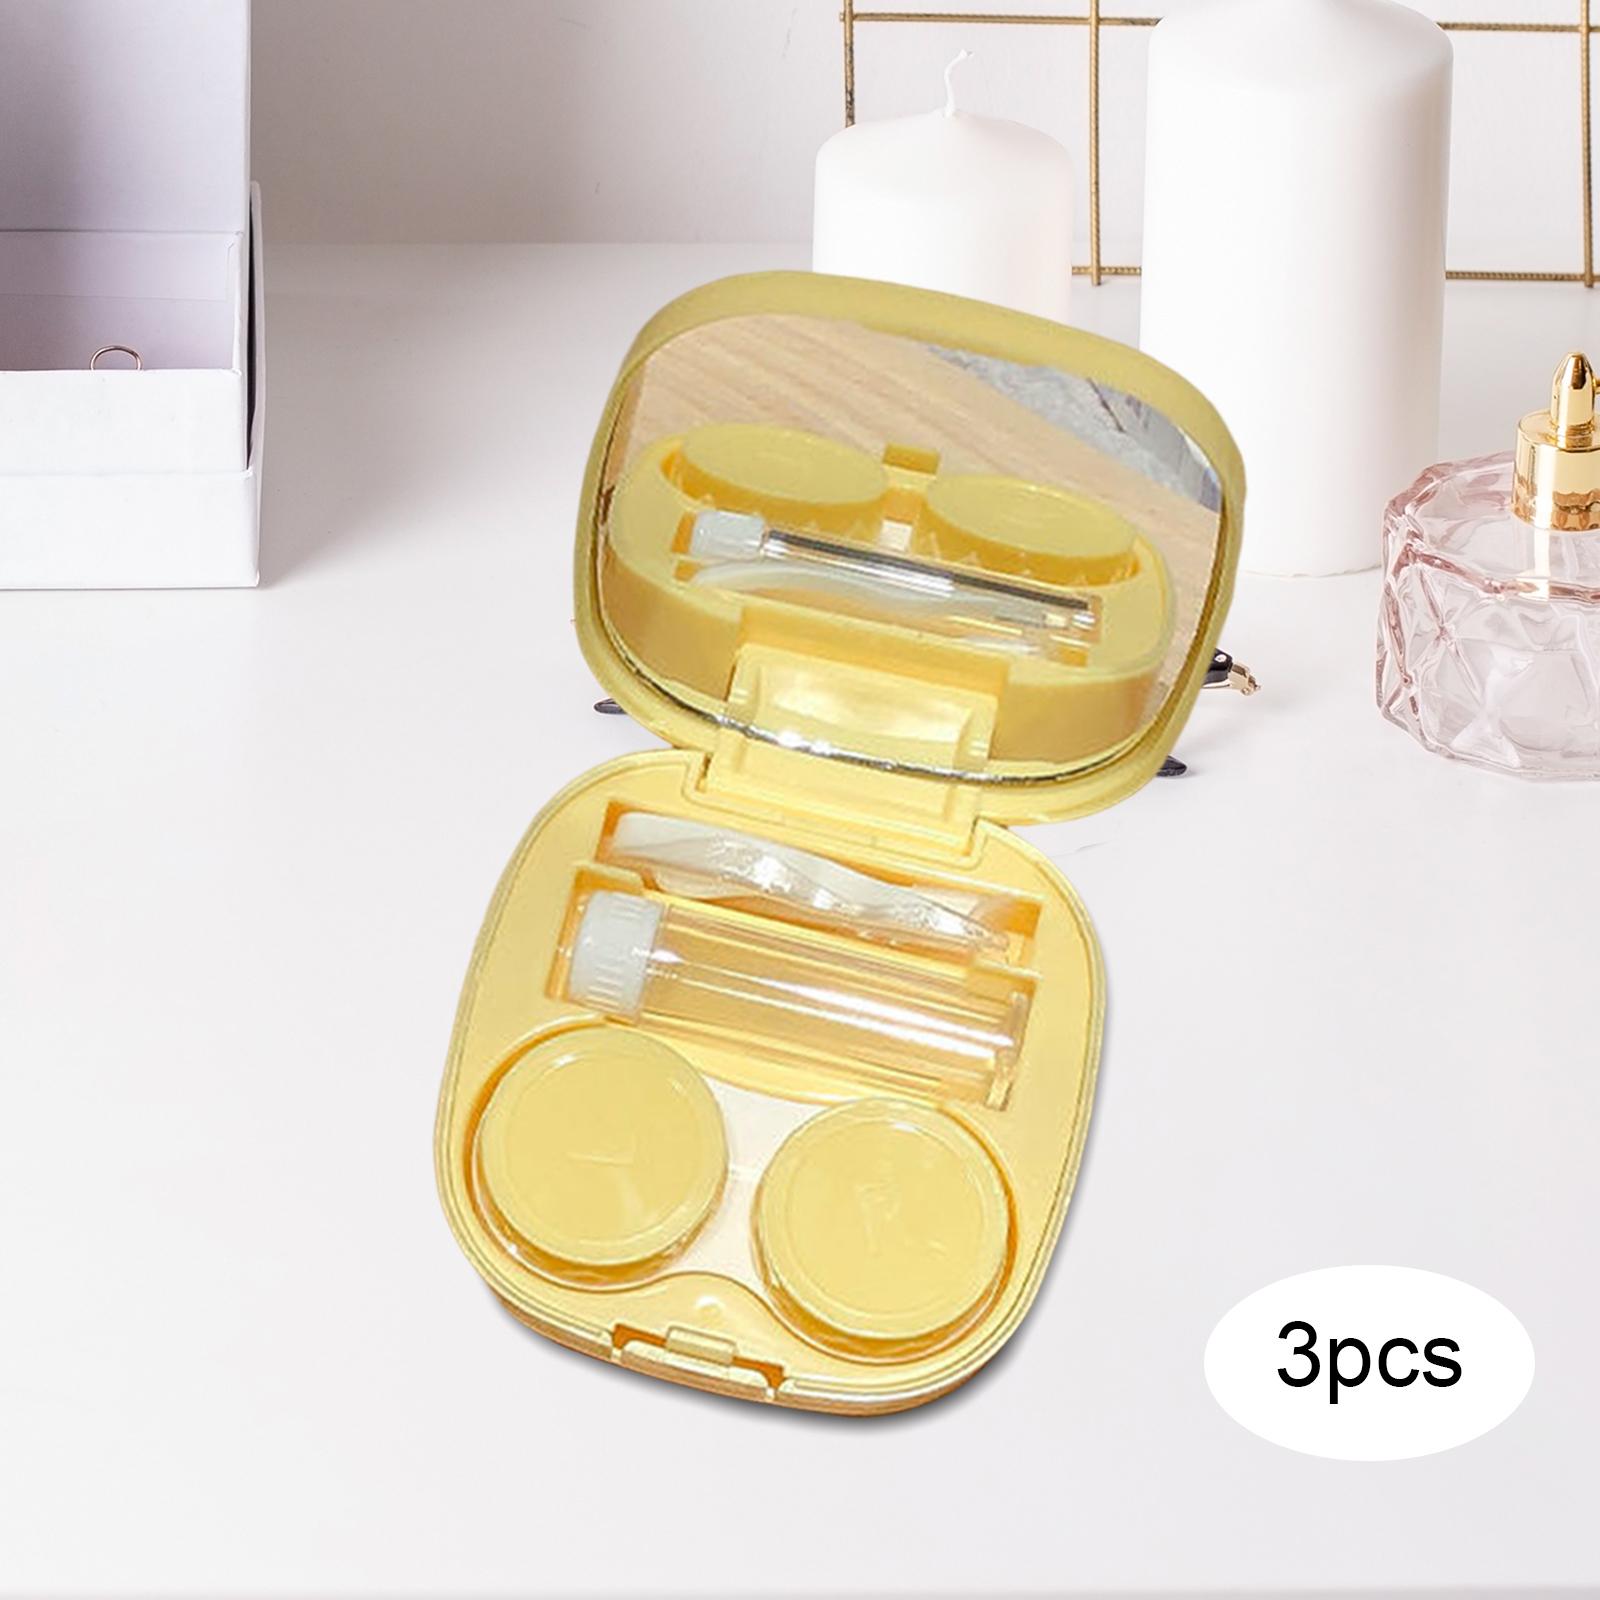 Pack of 3 Compact Contact Lens Case Kit with Mirror Durable Convenient Small Yellow